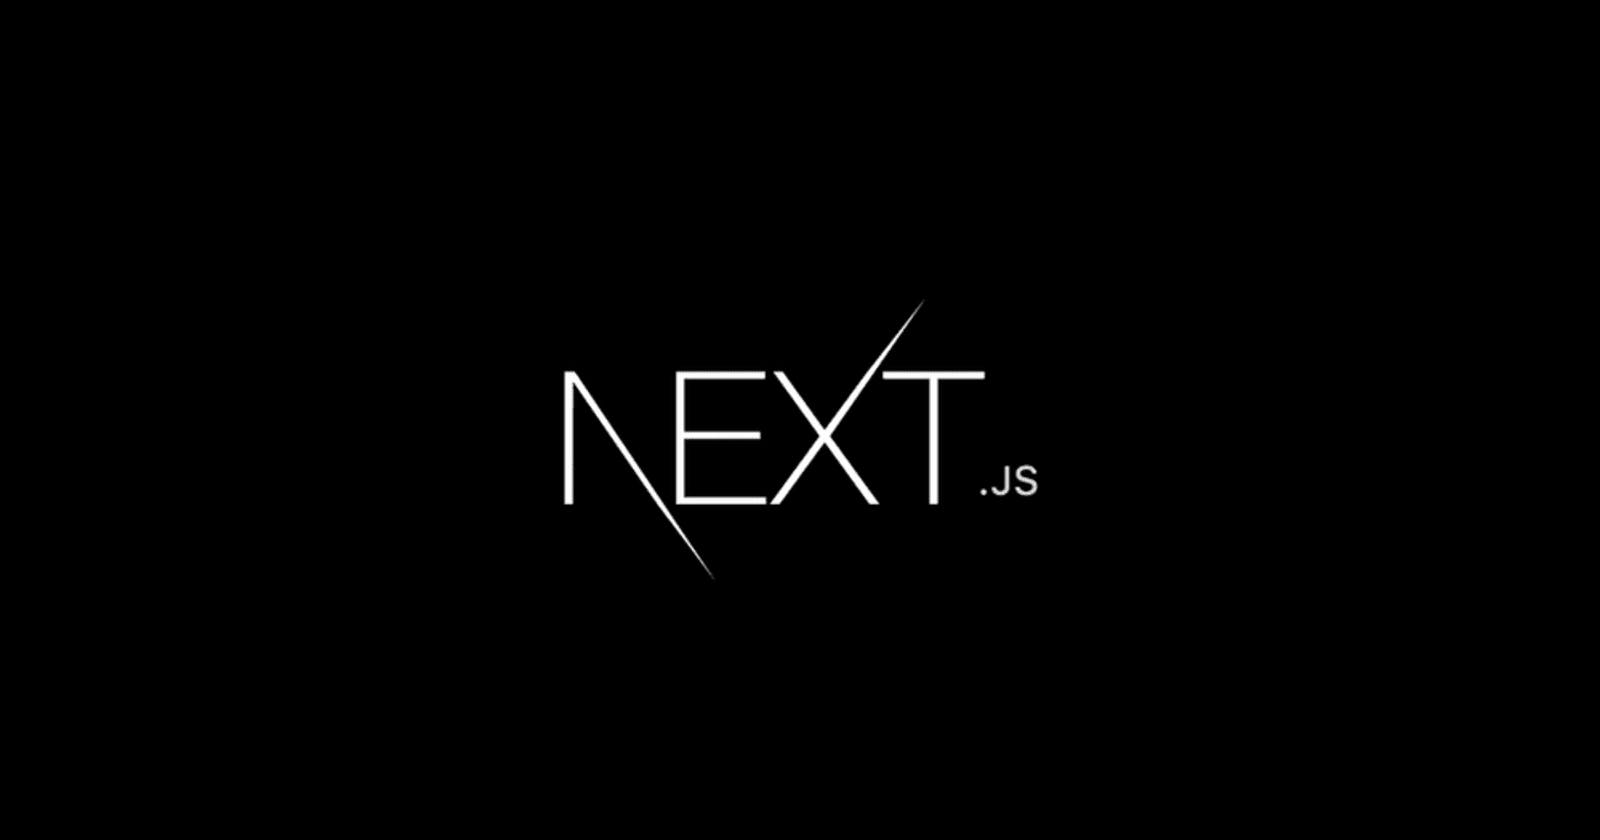 Next.js: The Go-To Framework for High-Performance React Applications